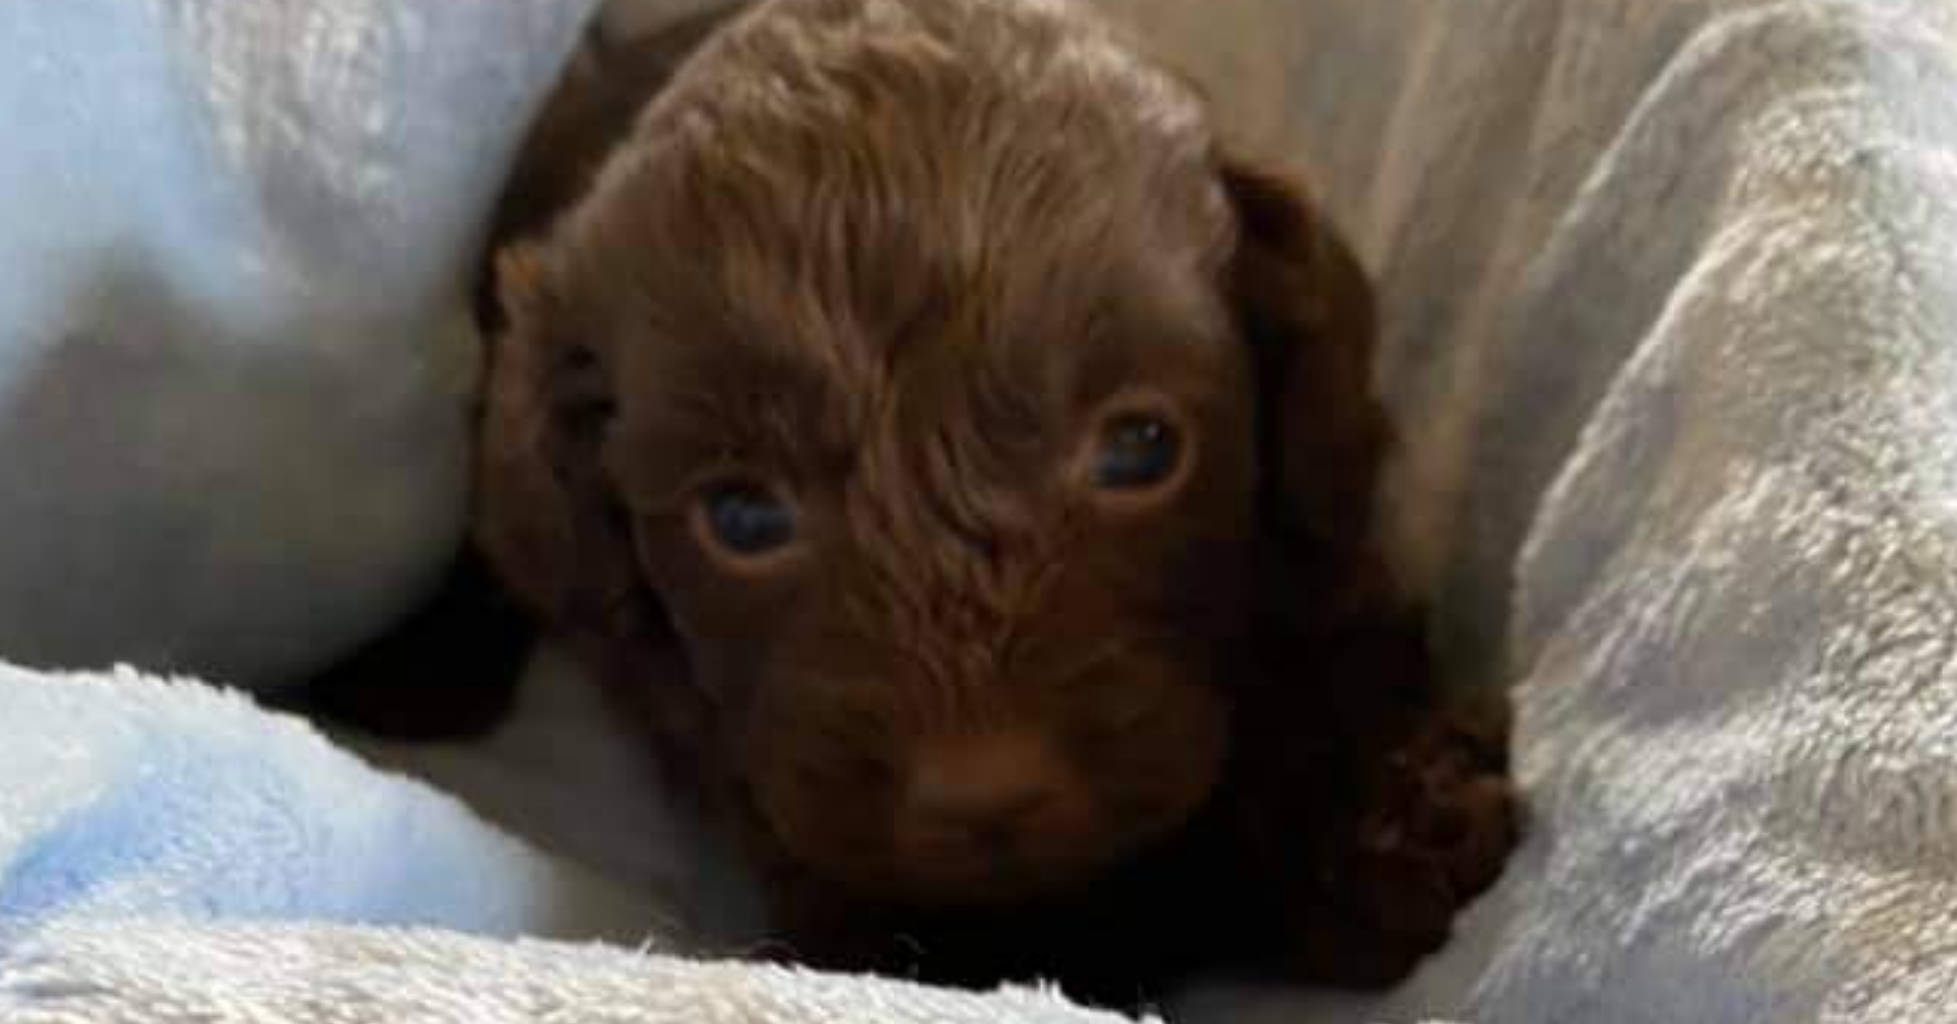 You are currently viewing MISSING CHOCOLATE MALE CAVOODLE PUPPY.